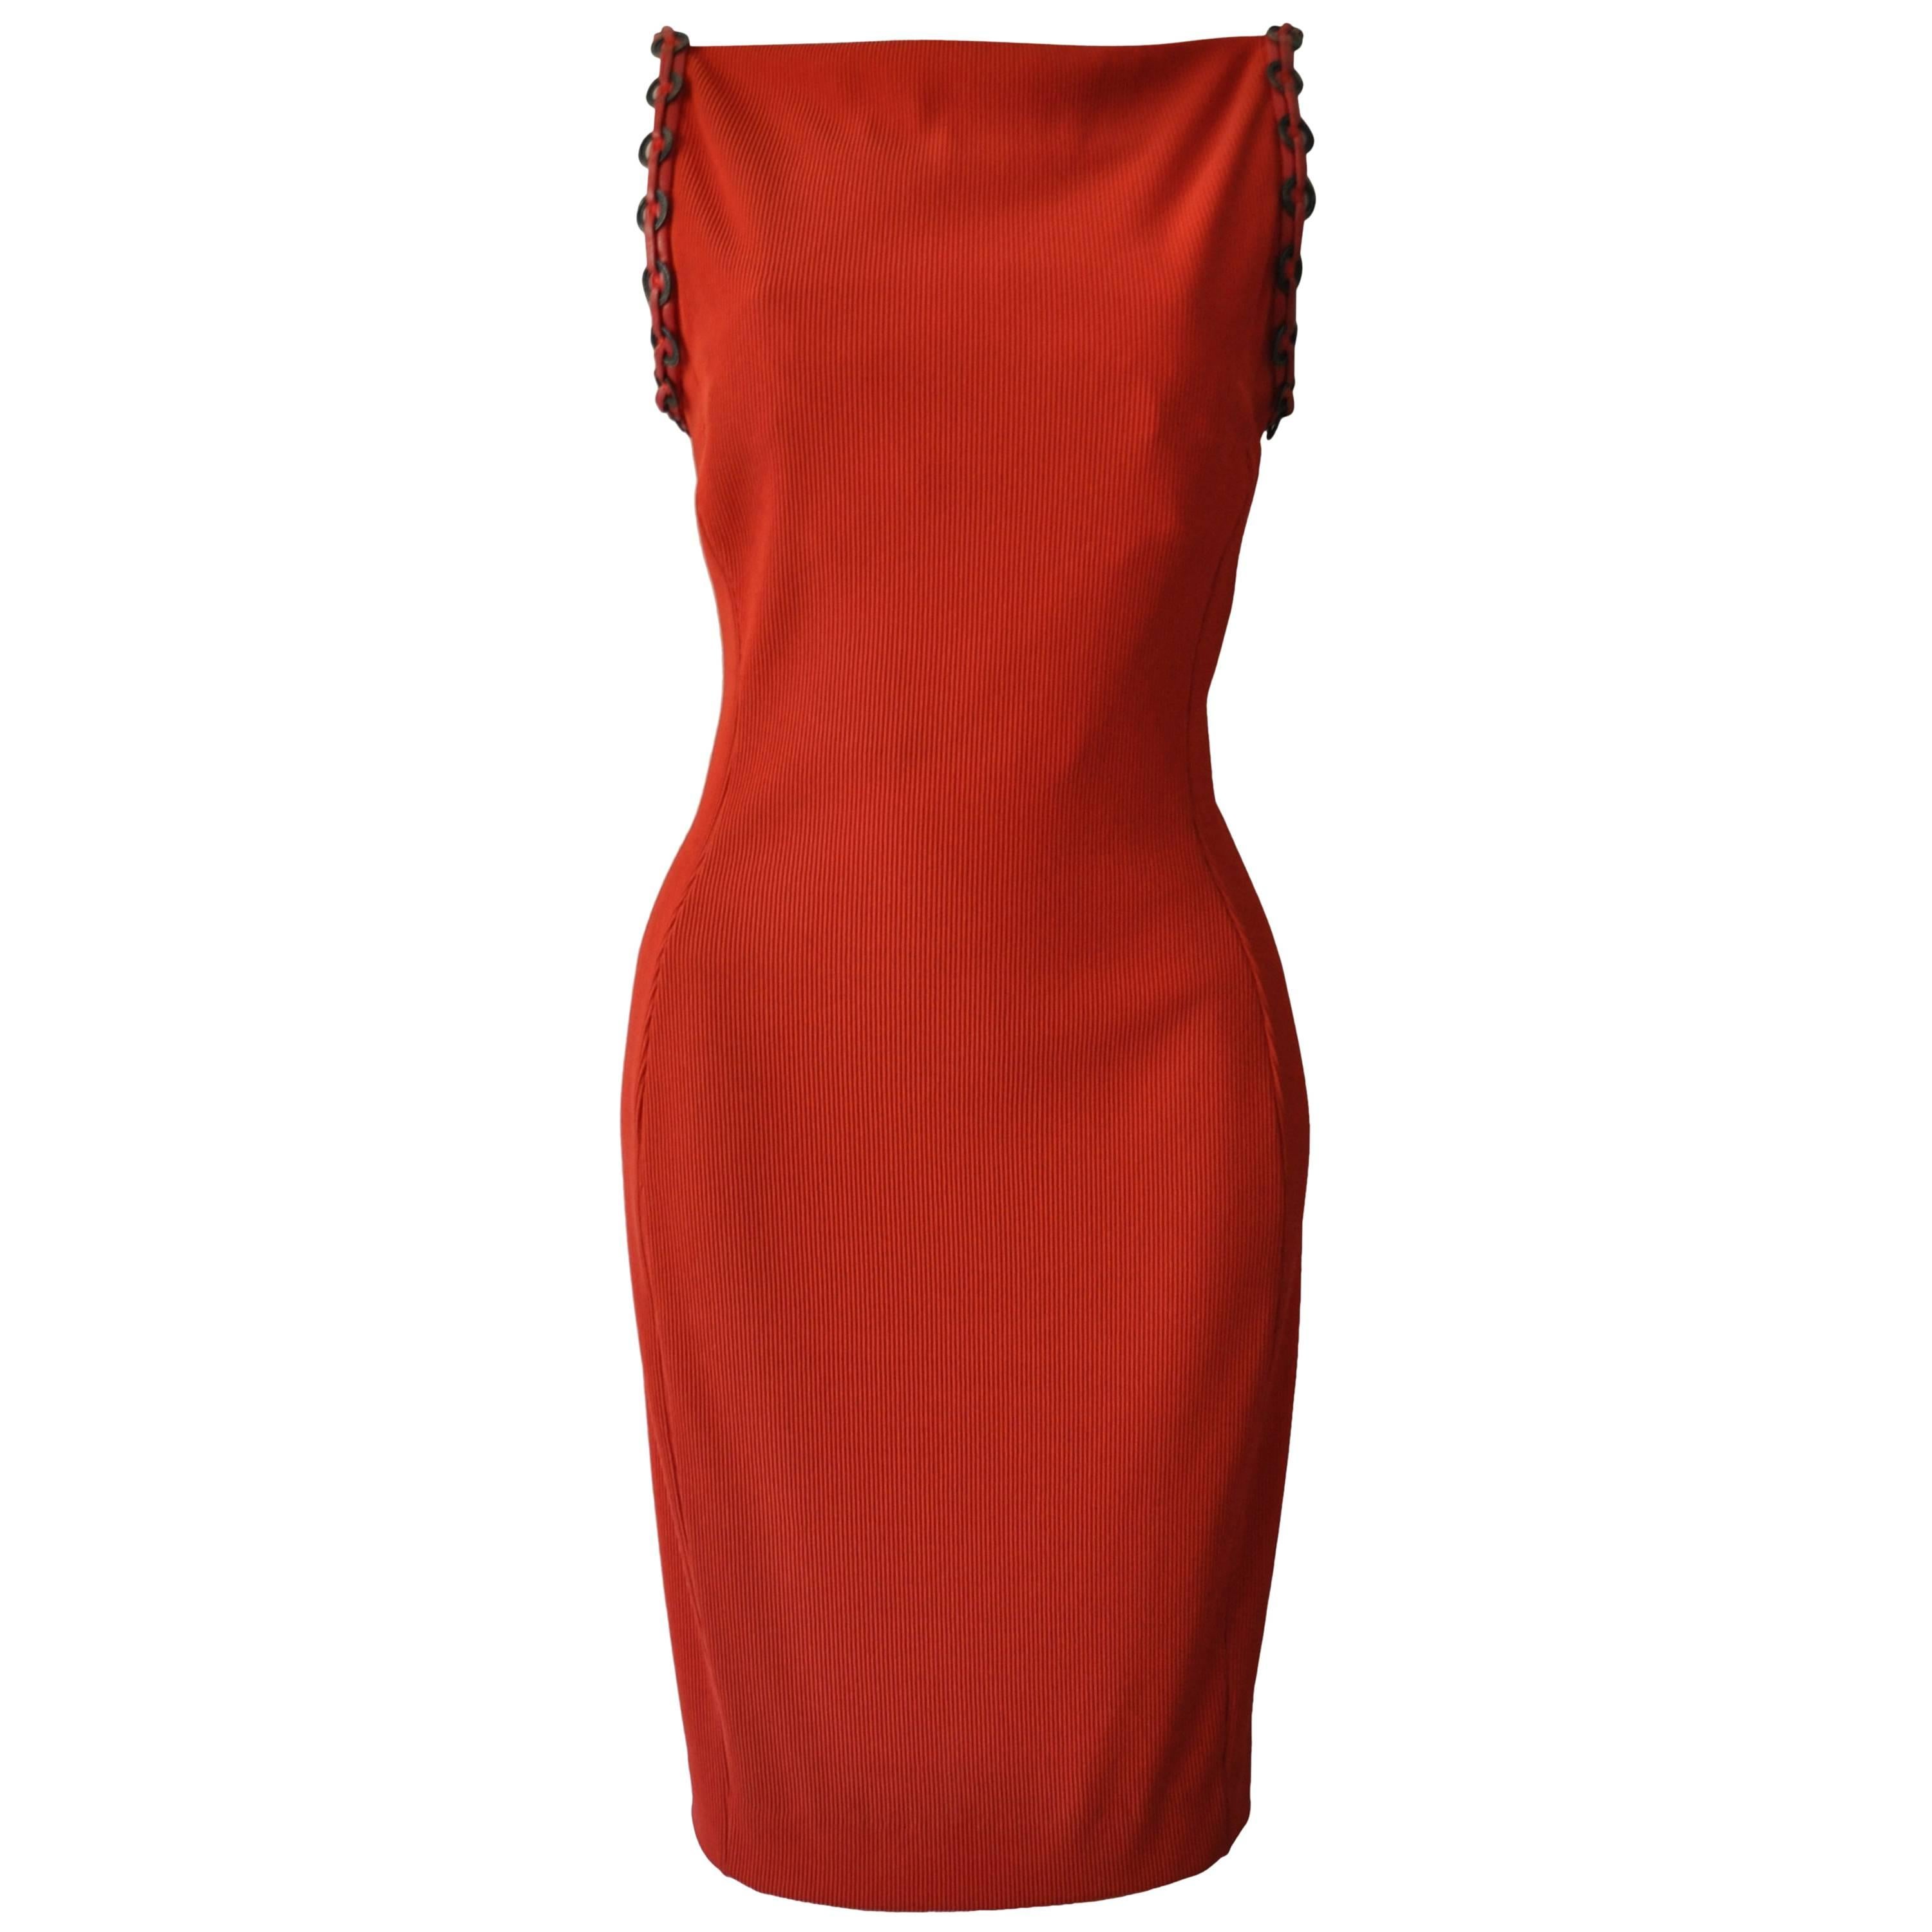 Iconic Gianni Versace Couture Red Siren Bodycon Dress For Sale